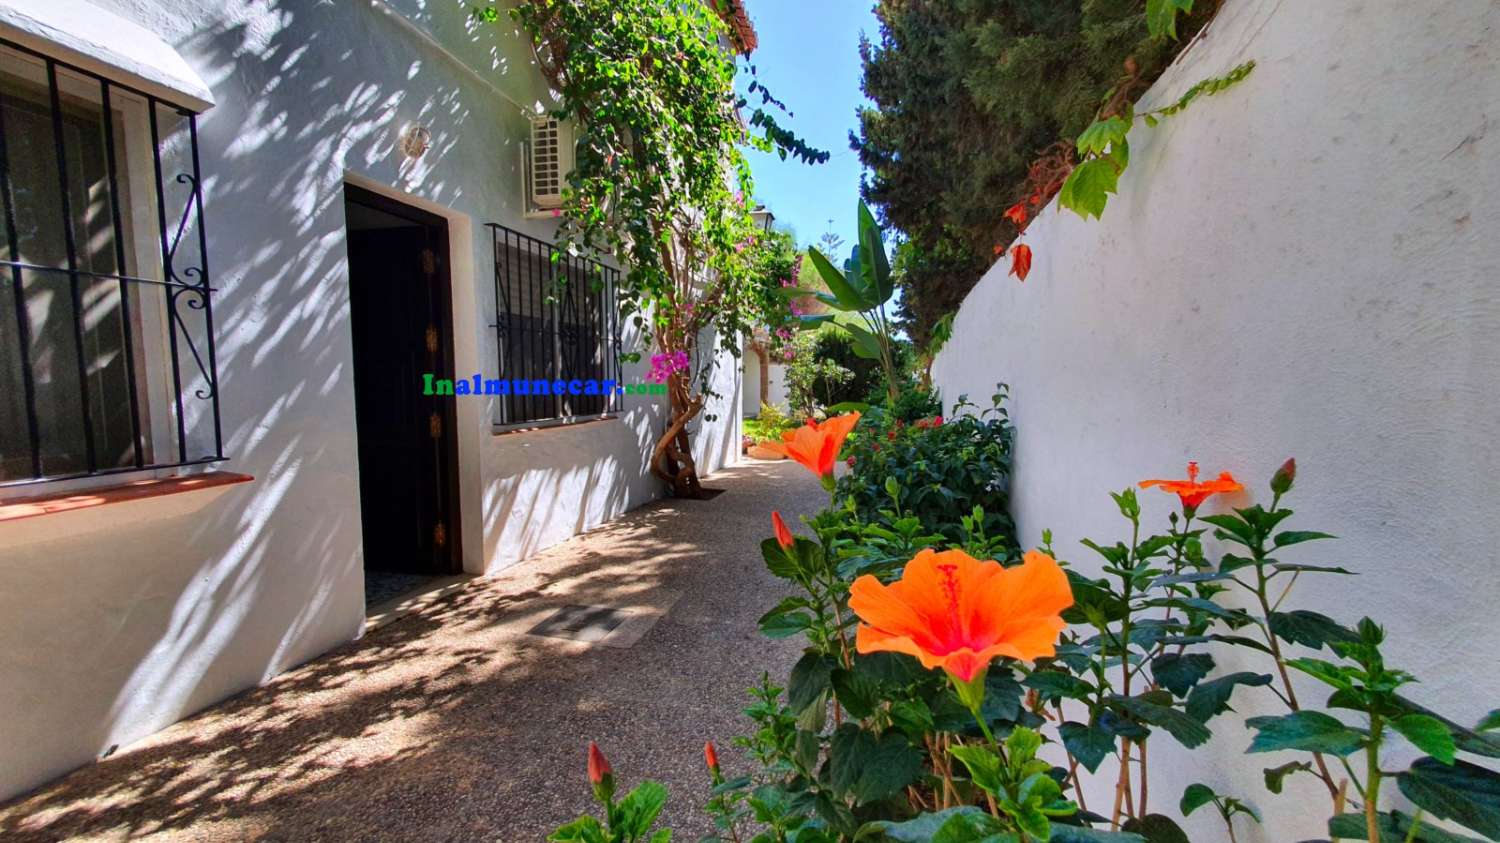 Villa for sale in Almuñécar with gorgeous sea views, garden and garage – close to the beach and restaurants